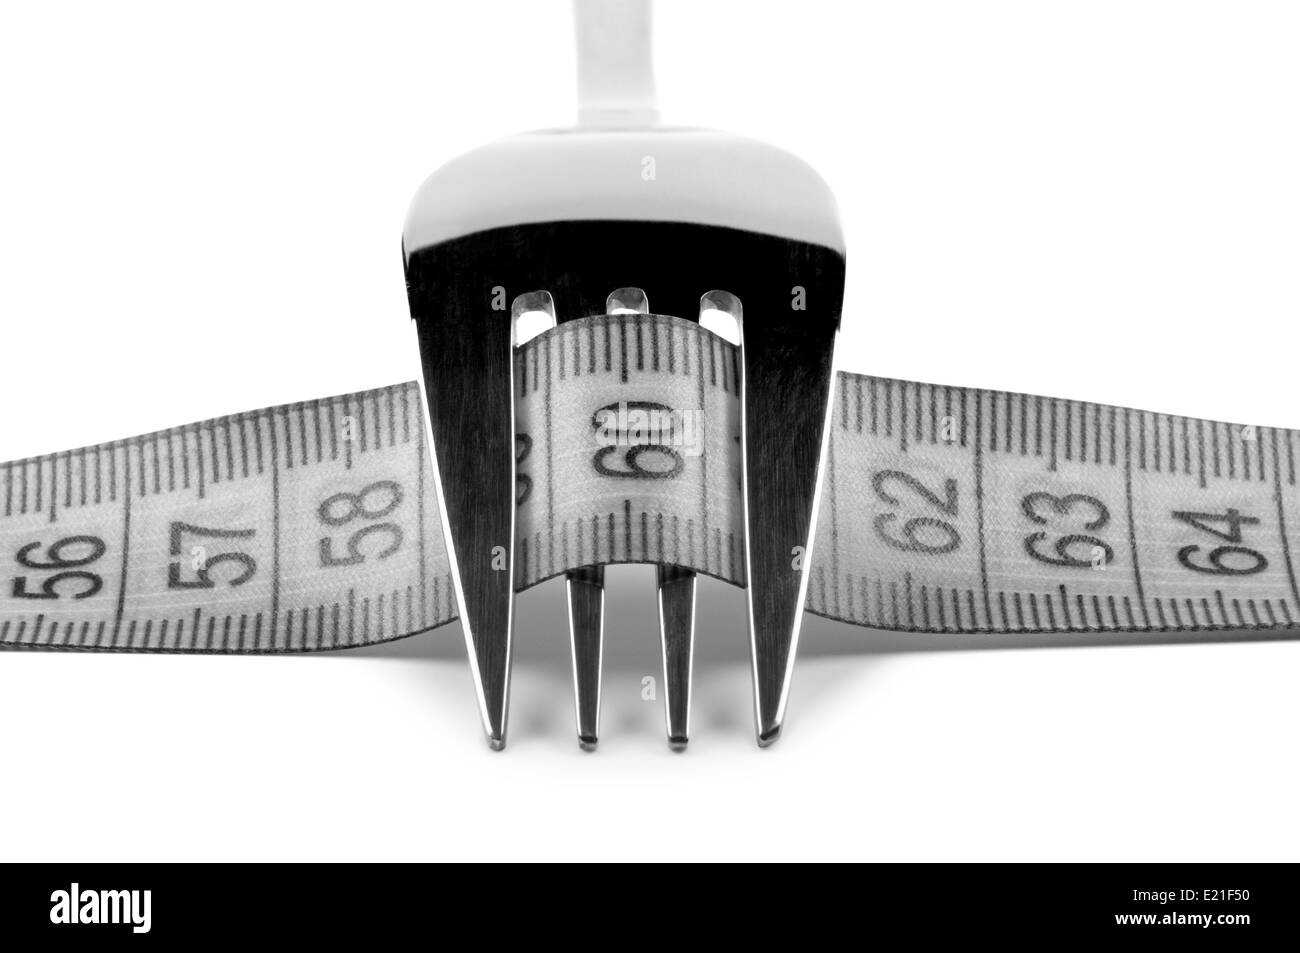 Fork with ruler. Concept nutrition and diet. Stock Photo